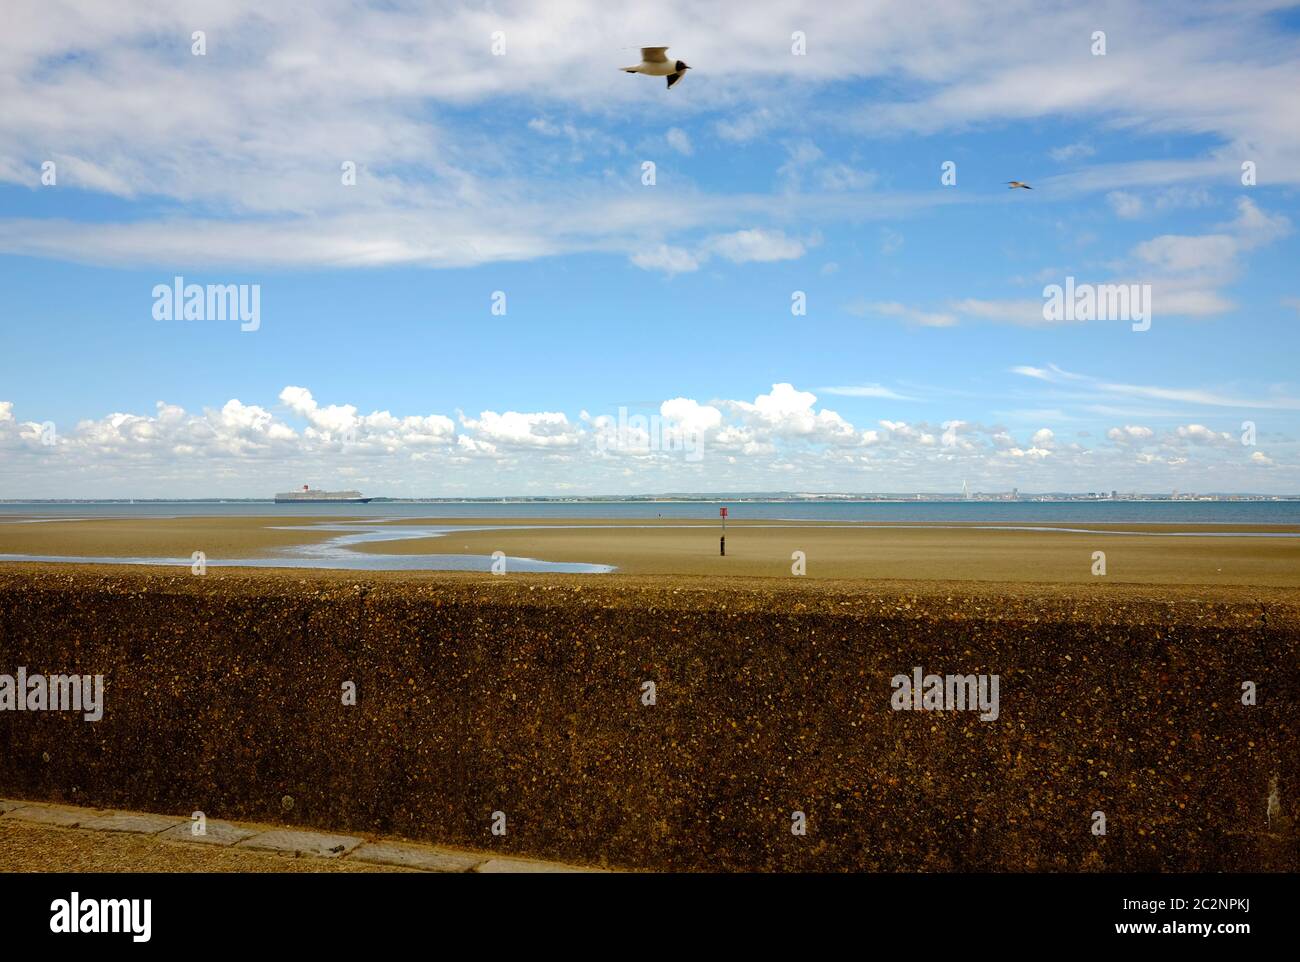 Ryde sand flats at low tide Solent Isle of Wight cruise ship on horizon under steam heading out seagulls in flight beach walk Stock Photo